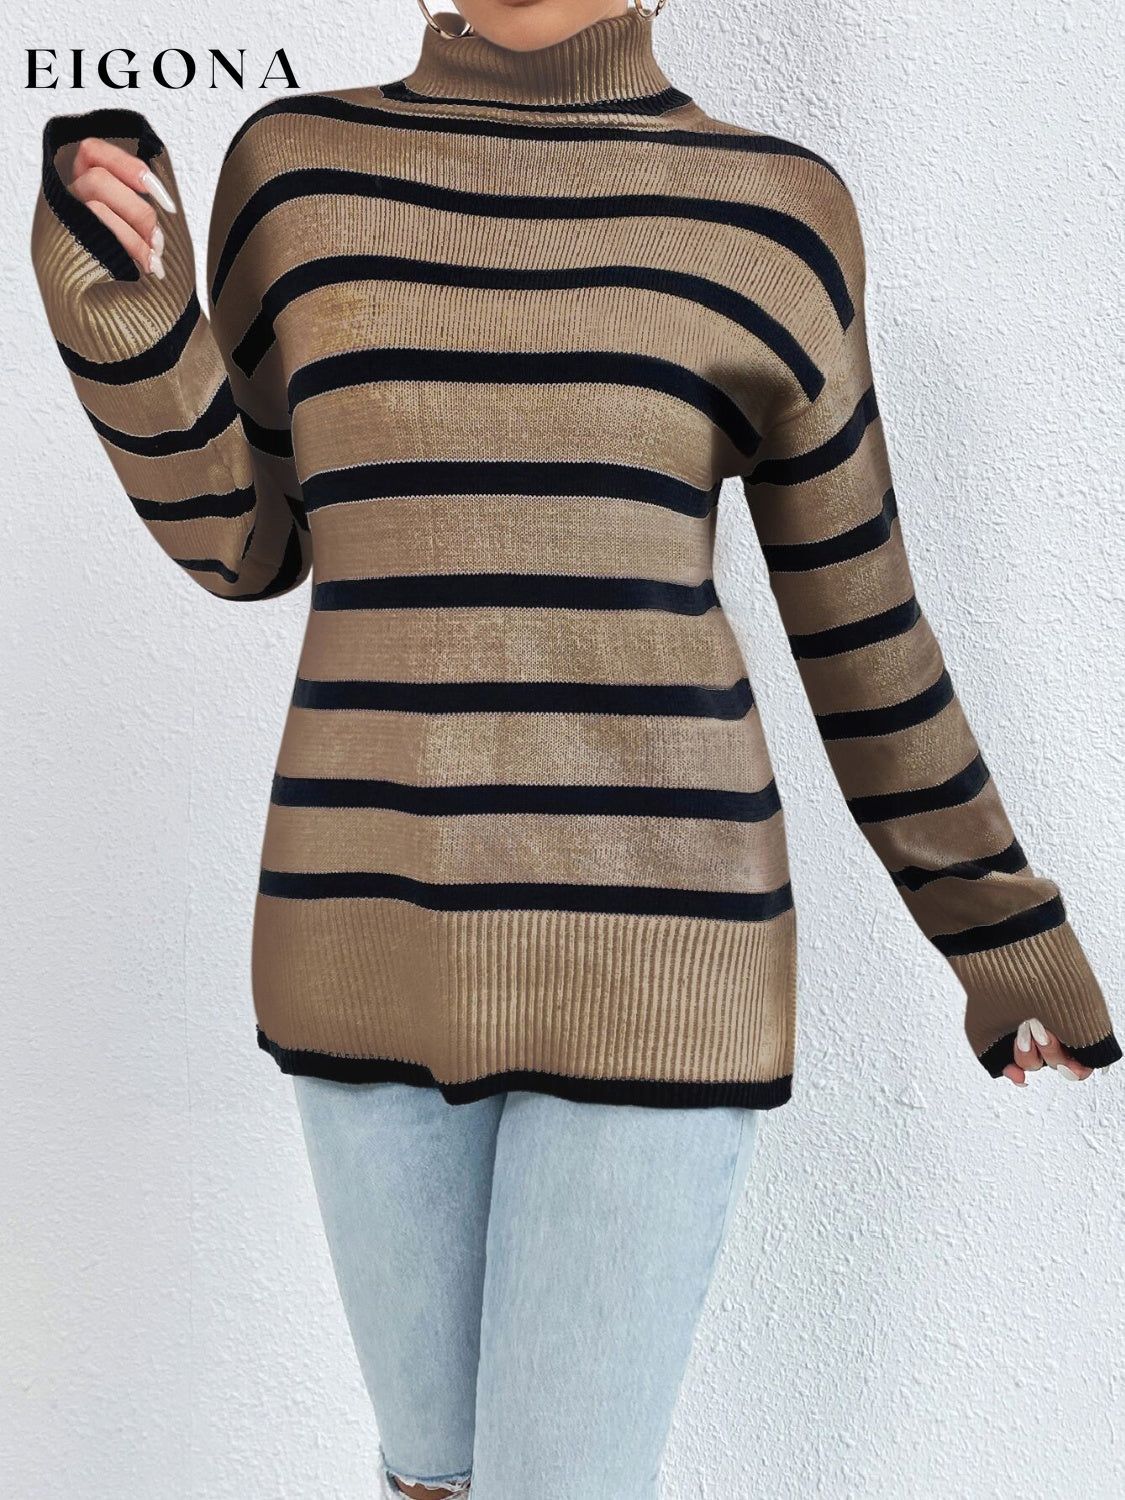 Striped Turtleneck Drop Shoulder Sweater clothes long sleeve shirt Ship From Overseas striped sweater sweater Yh